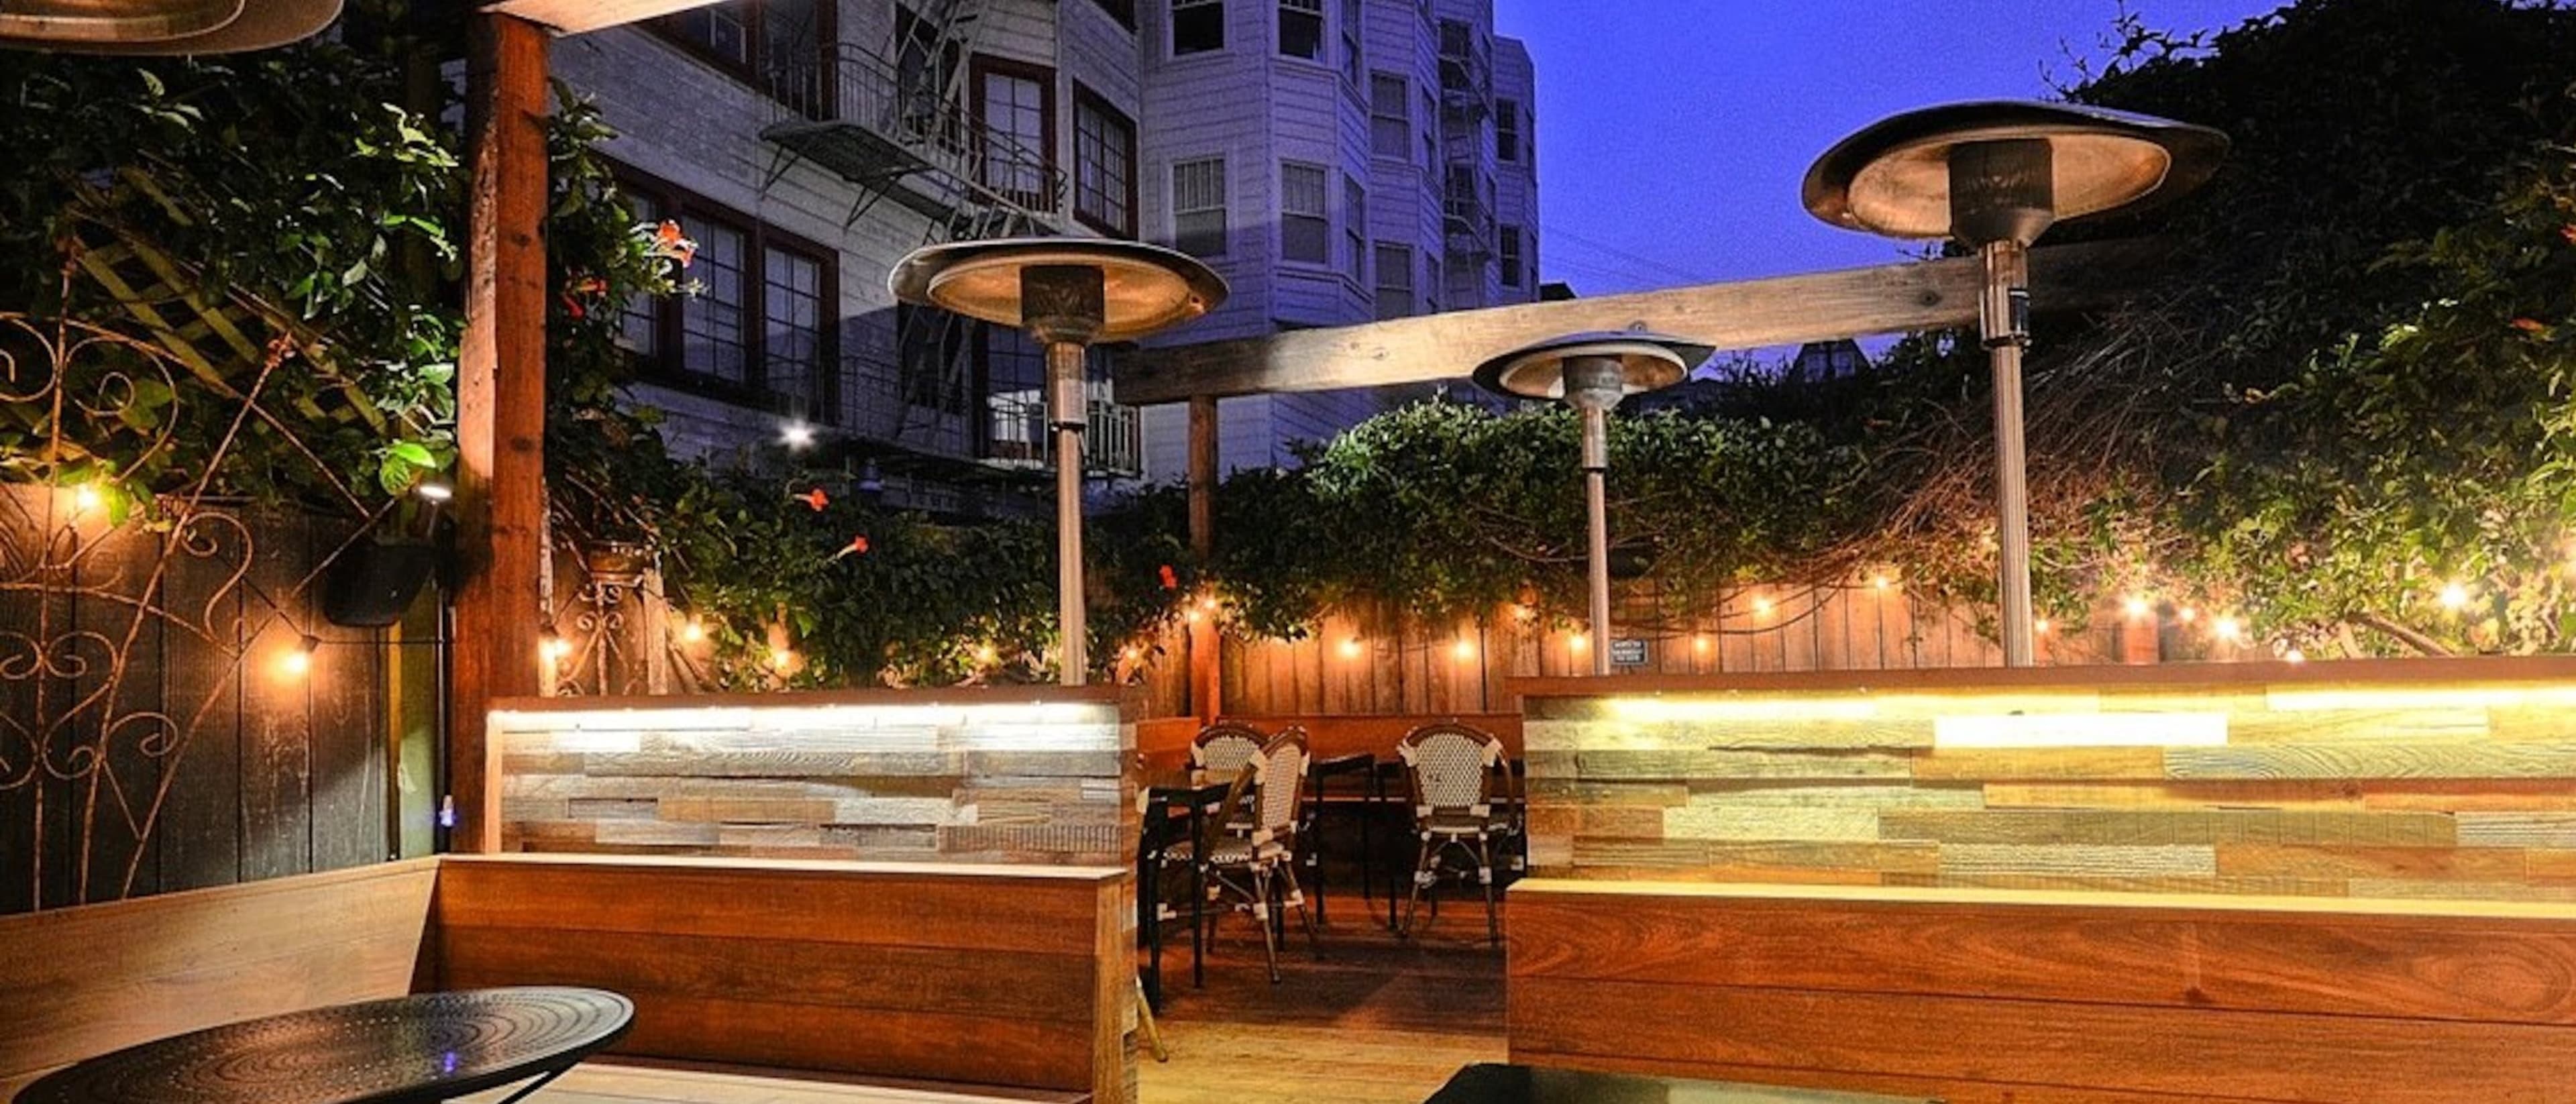 SF Restaurants With Outdoor Heat Lamps feature image